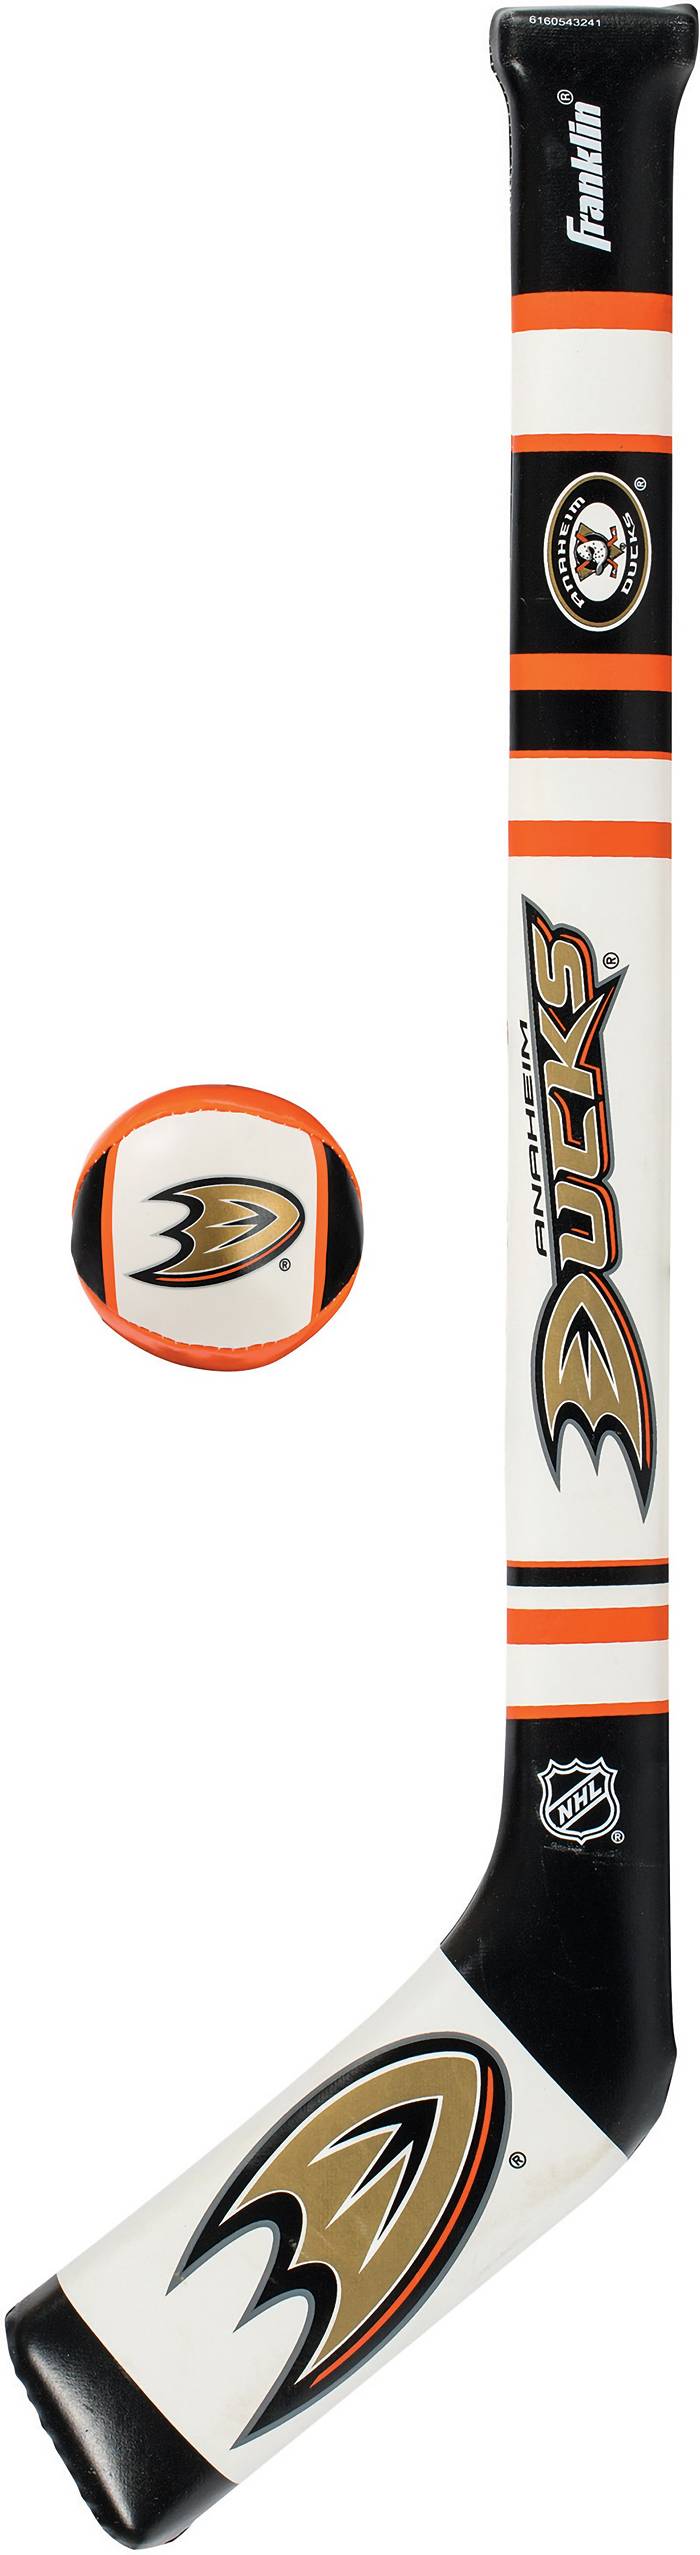 Anaheim Ducks Customized Number Kit for 2021 Reverse Retro Jersey